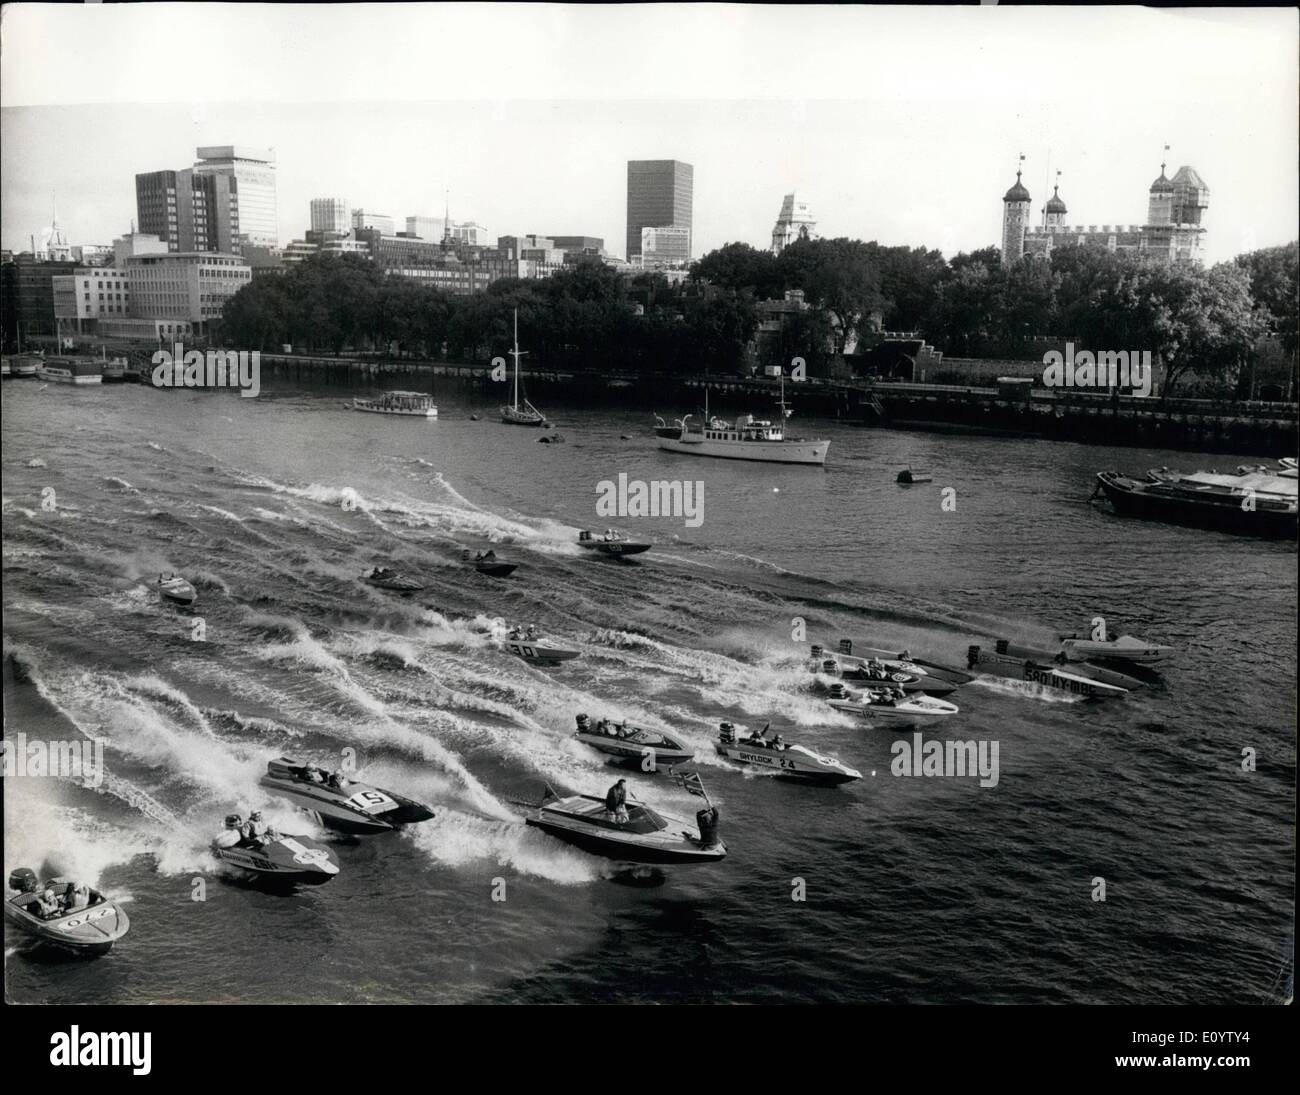 Jun. 06, 1971 - Rough weather shortens Putney-Calais power boat race.: The scene as power boats sett off opposite the Tower of London yesterday for the scheduled Putney-Calais race yesterday. Because of bad weather the course was reduced, to Ramsgate and back to Putney. Stock Photo